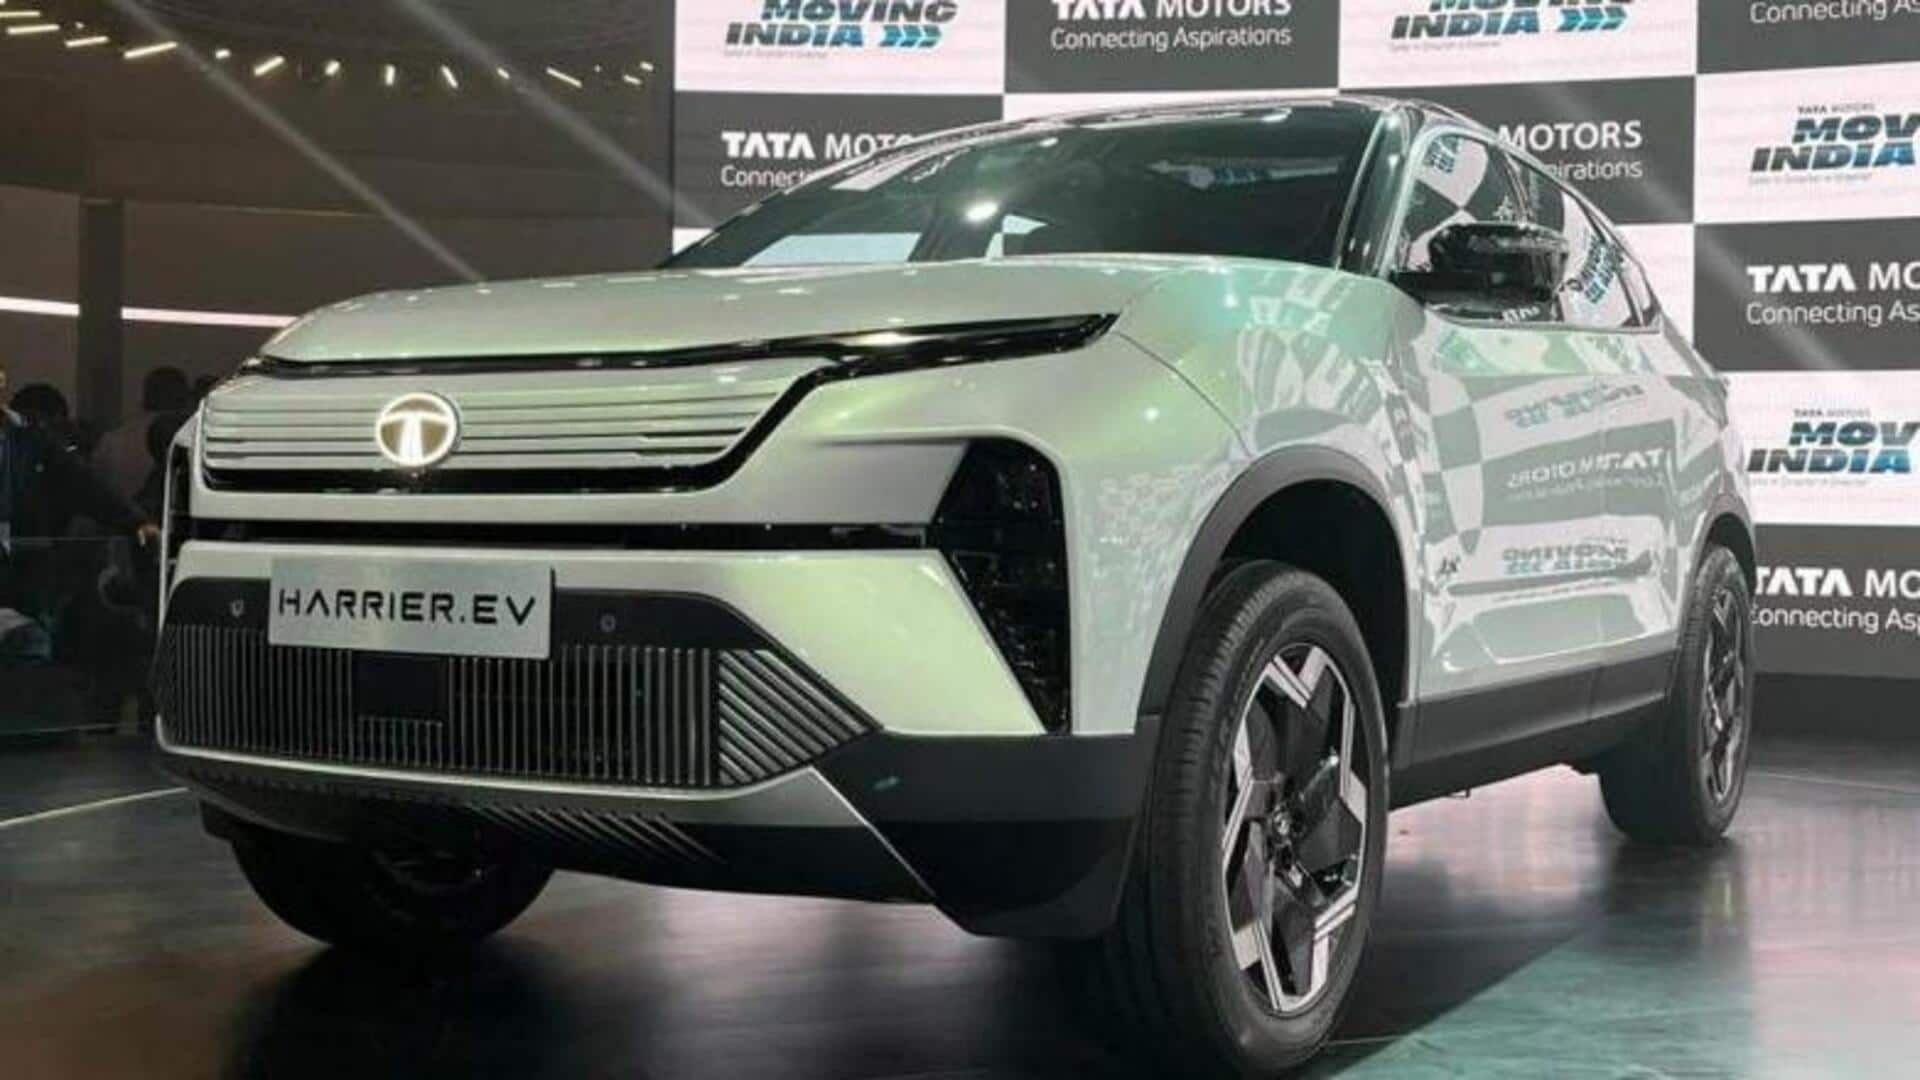 Tata Harrier.EV shown at Bharat Mobility Expo, launch in 2025